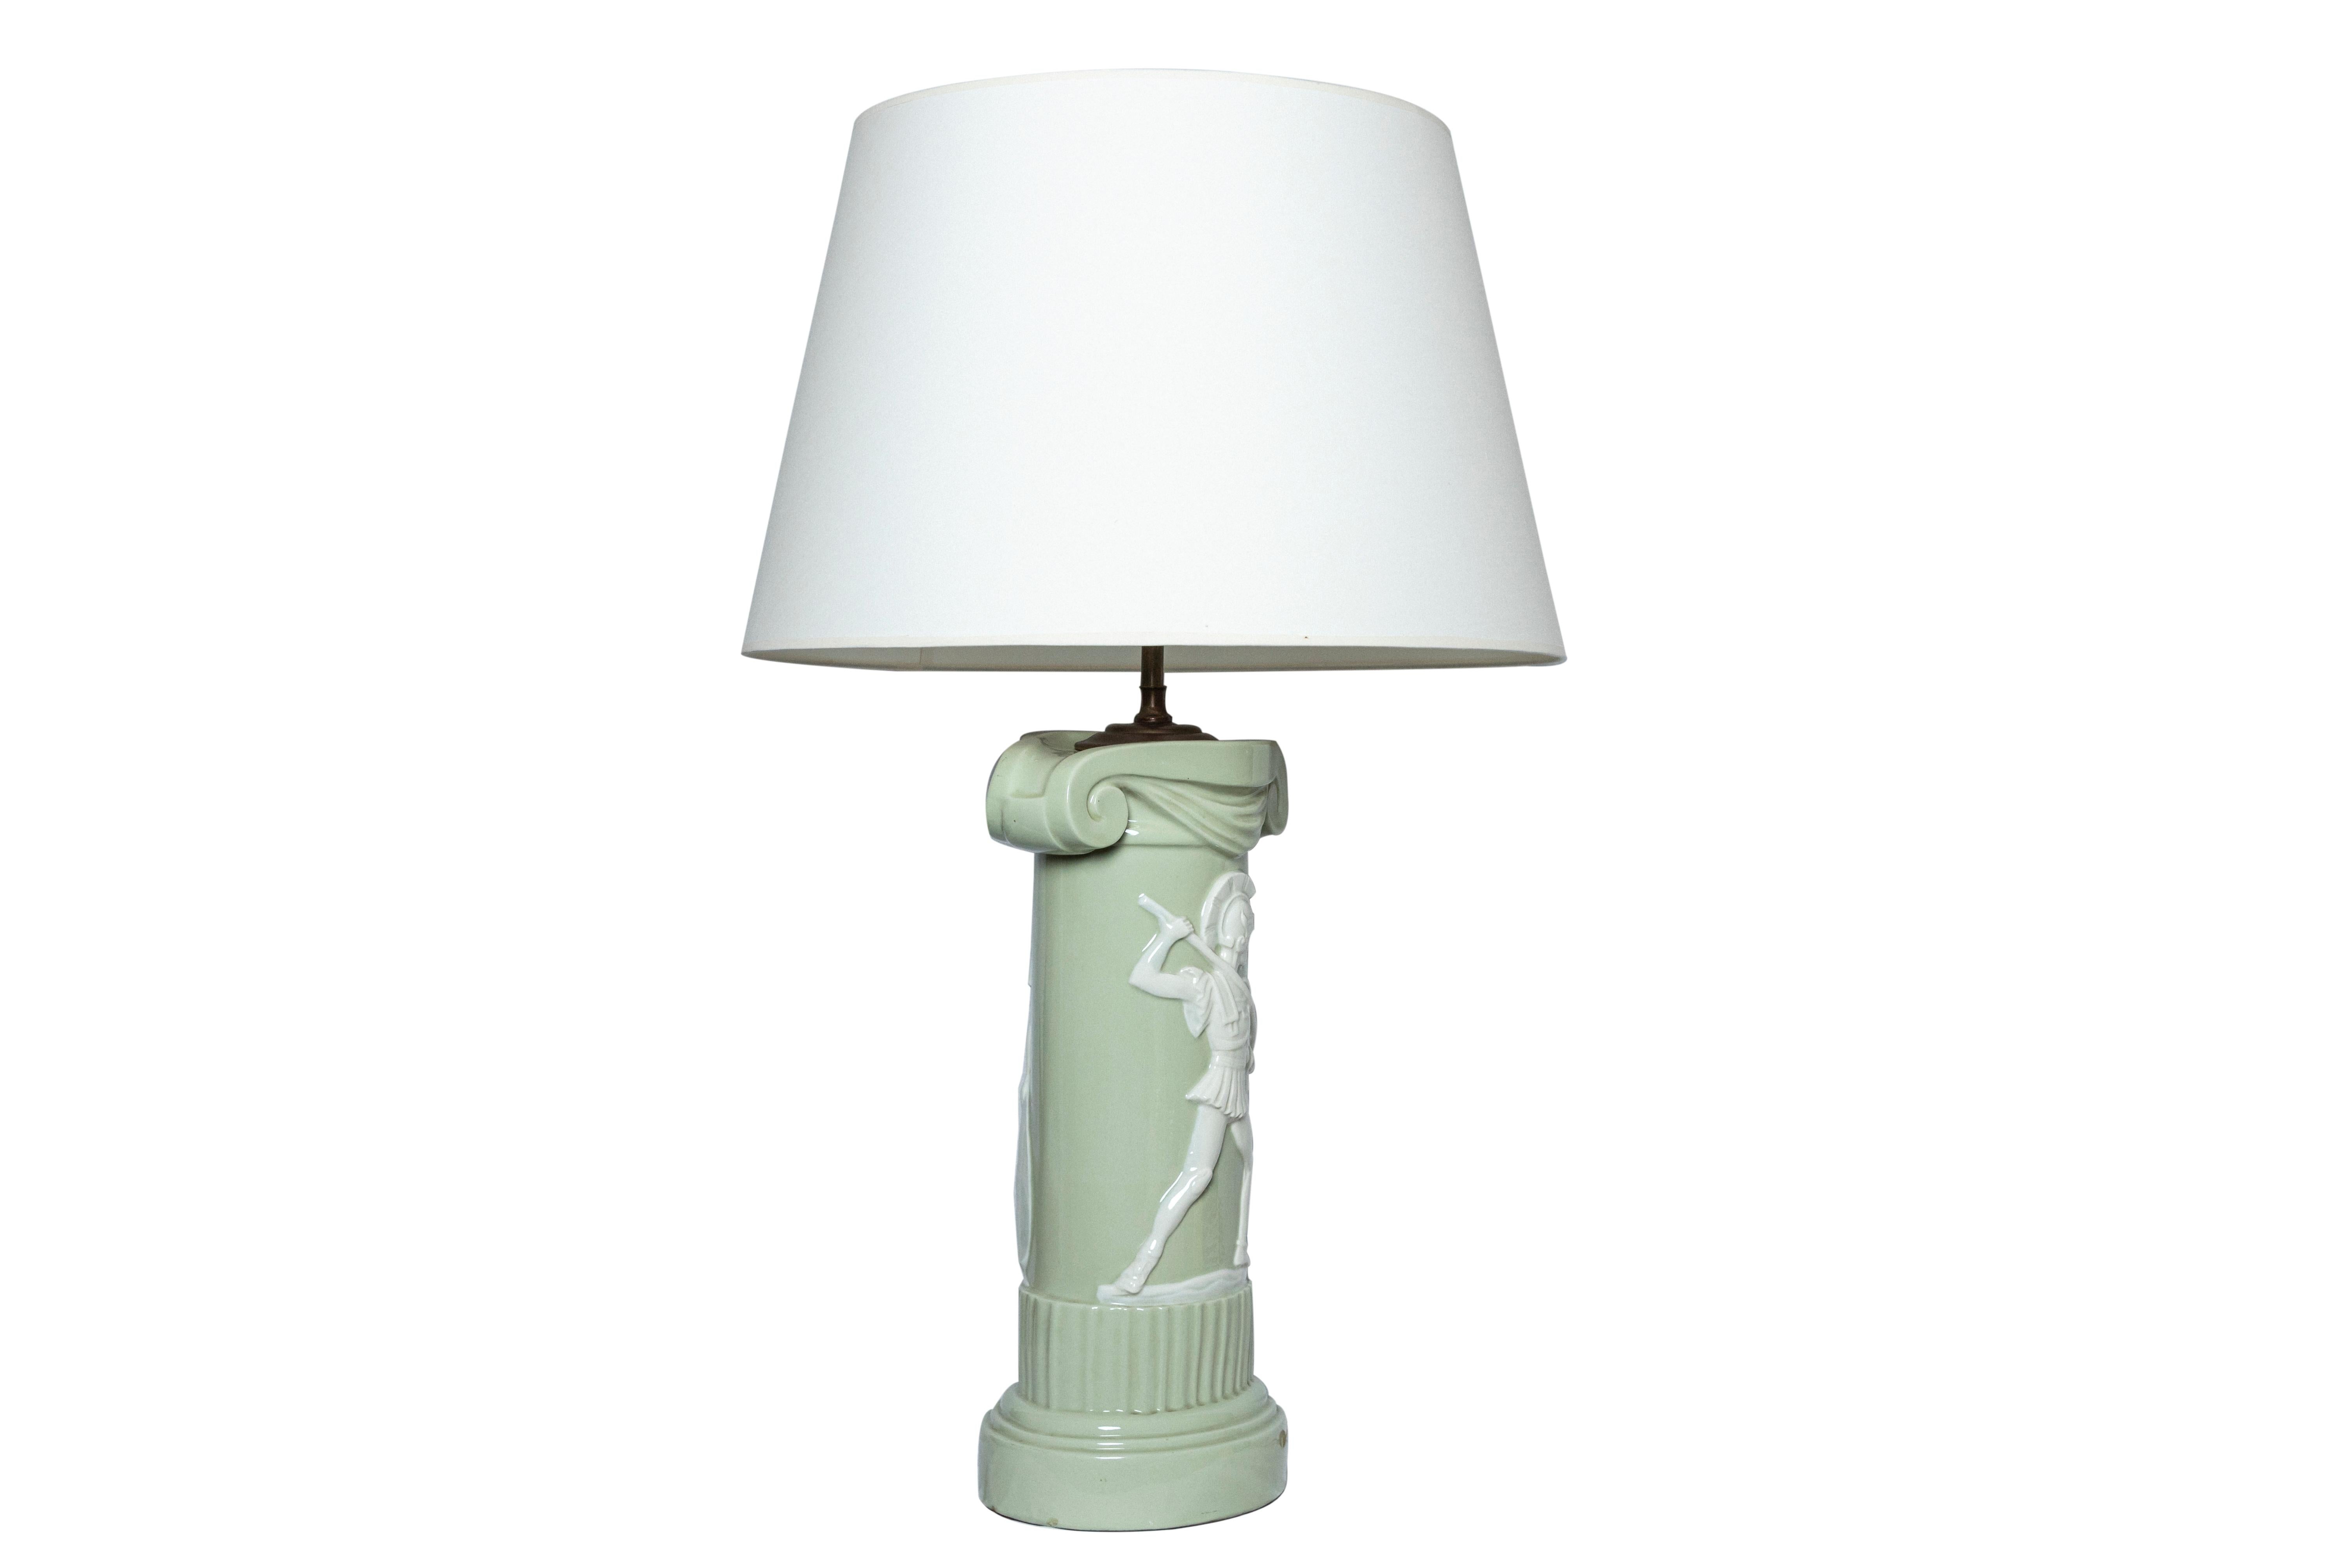 Neoclassical 20th century pair of green and white porcelain ionic column table lamps For Sale